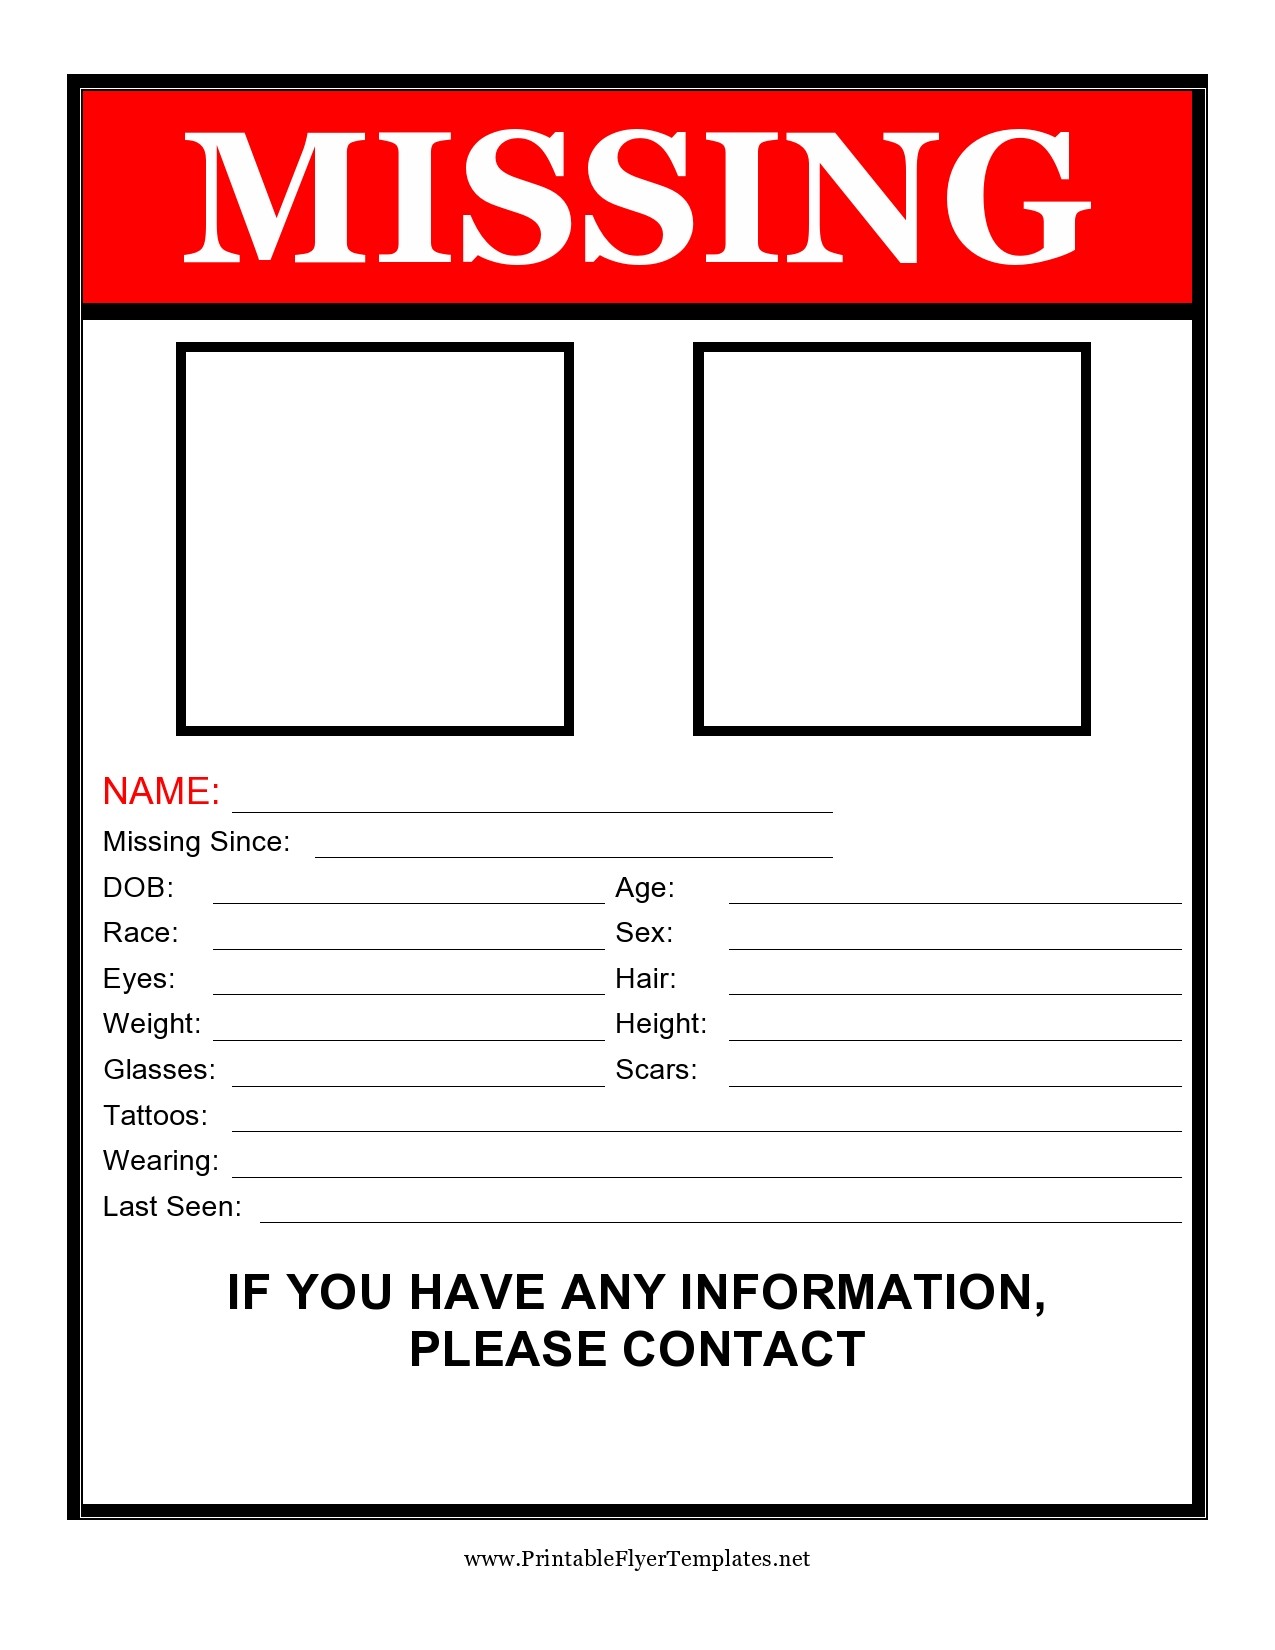 Free missing poster template 15